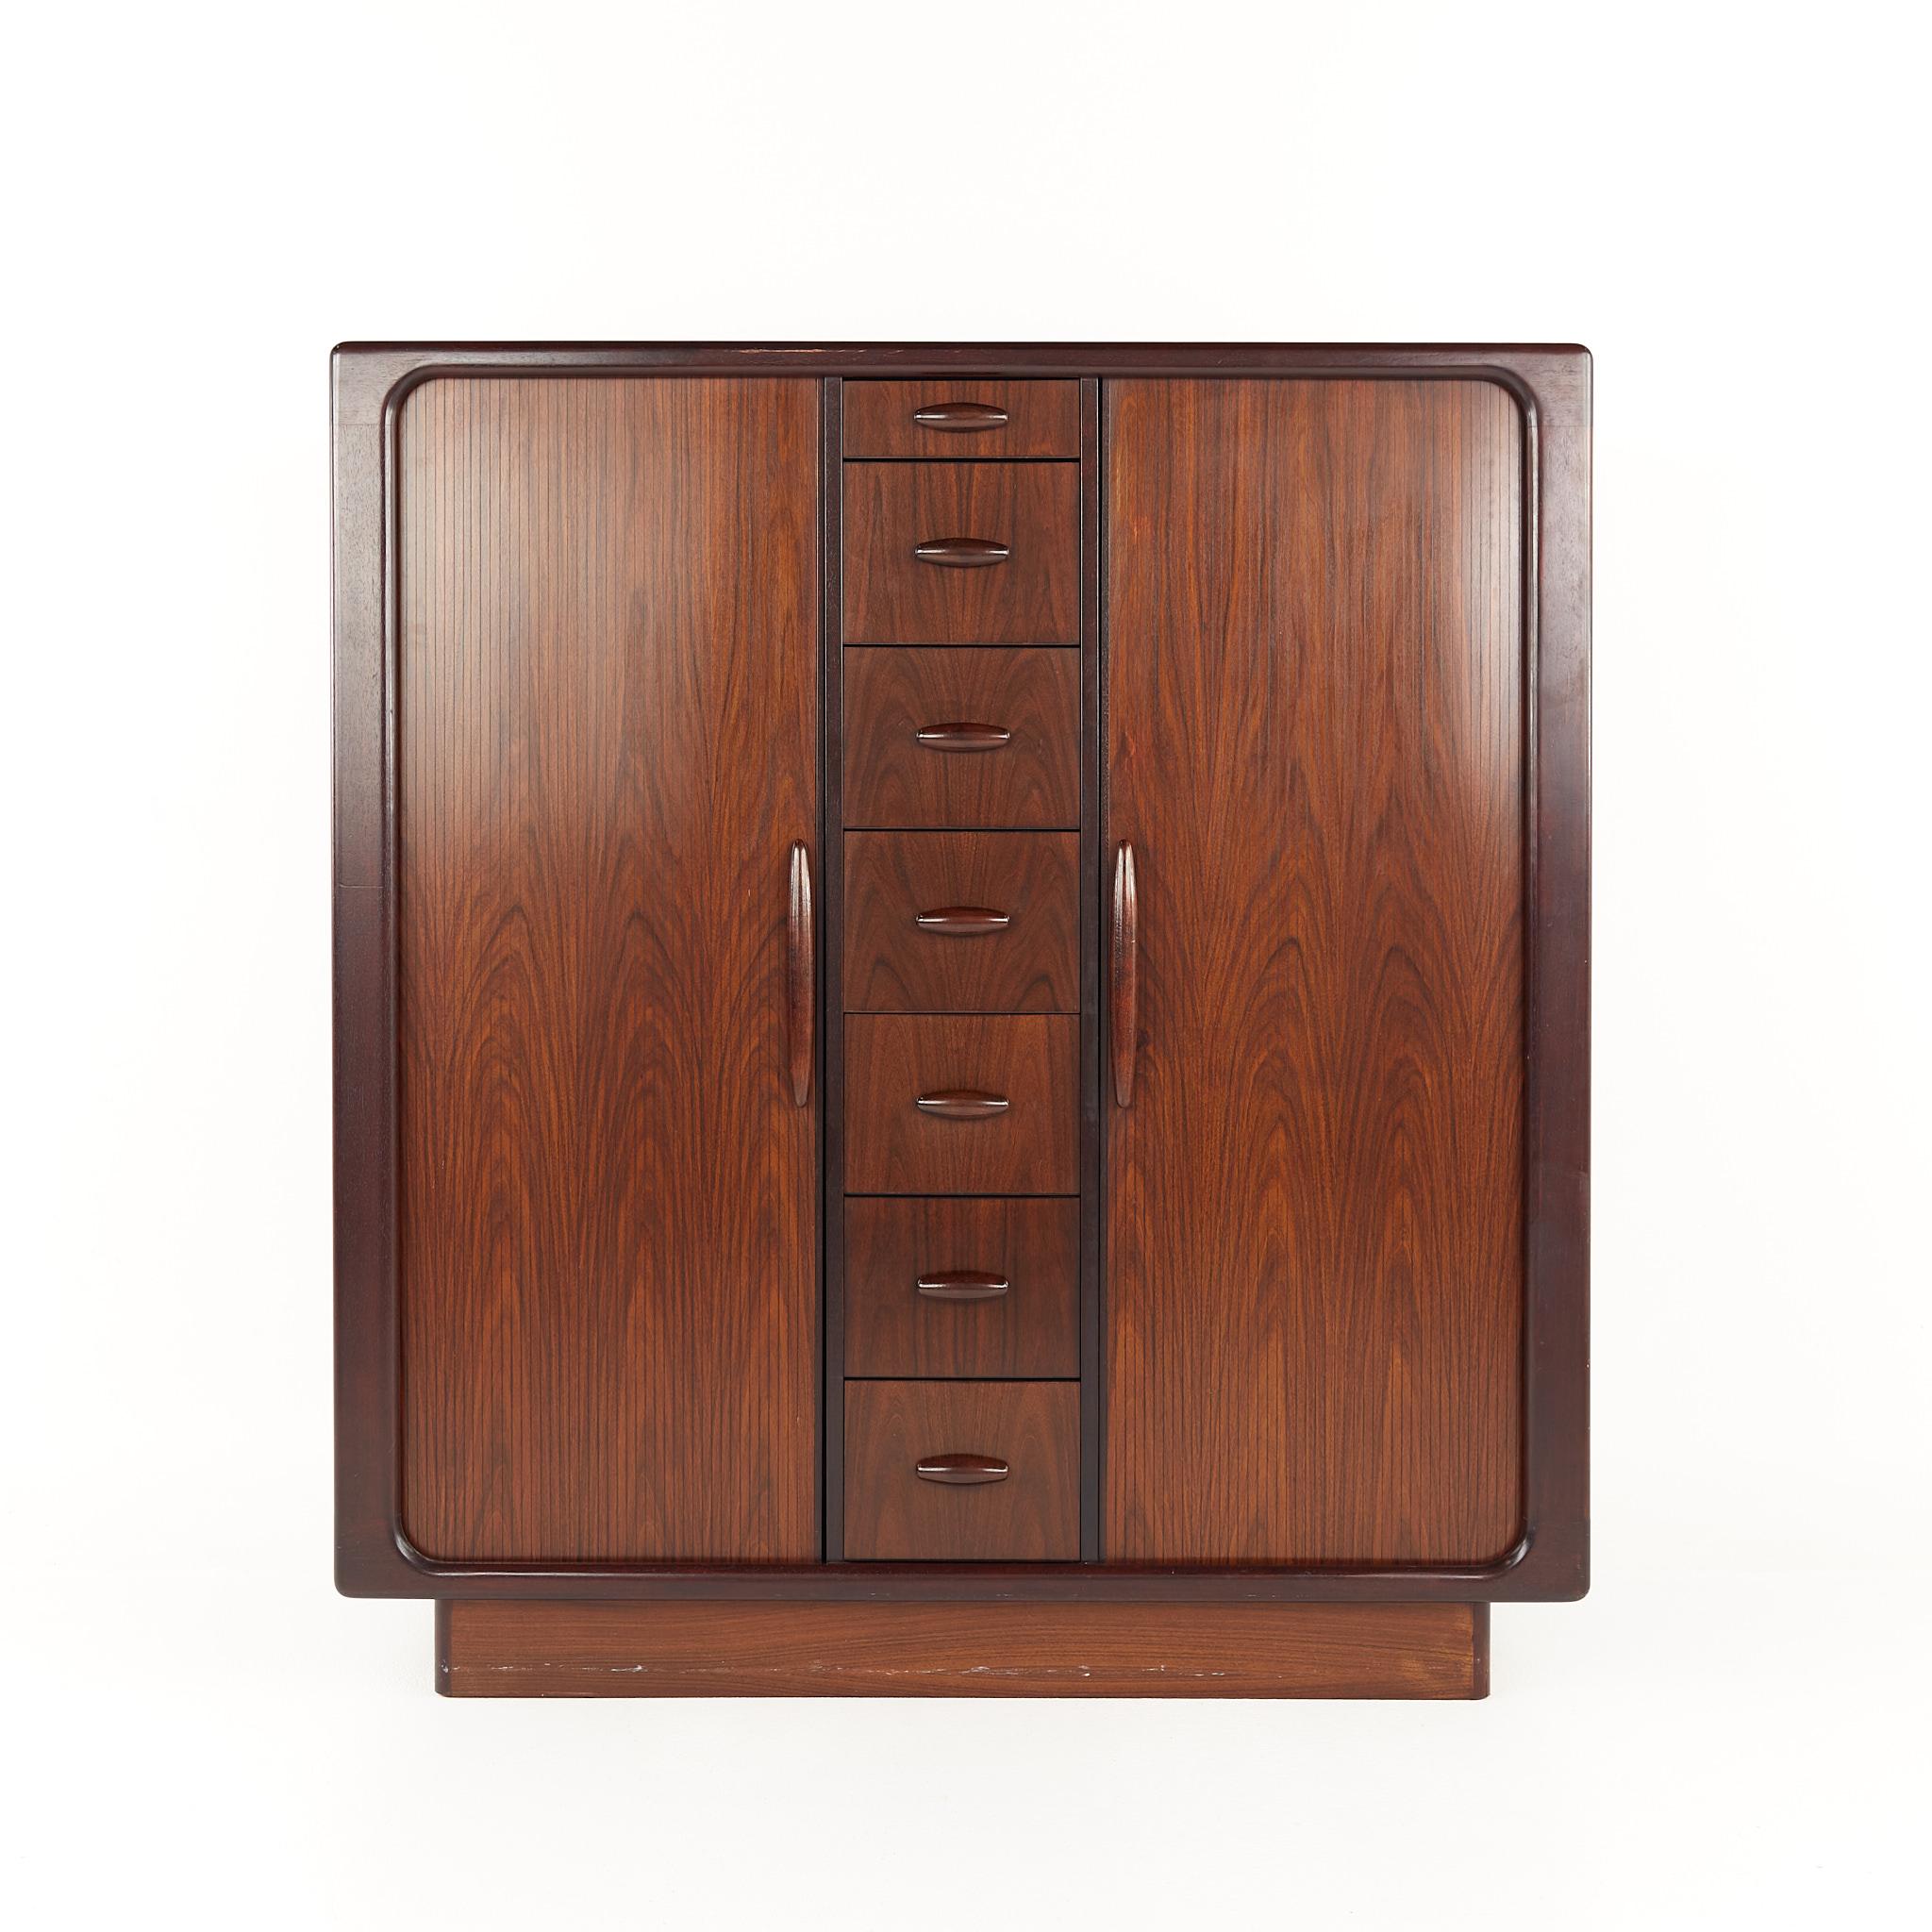 Dyrlund Mid Century rosewood tambour door highboy dresser armoire

The armoire measures: 48 wide x 19 deep x 52 inches high

All pieces of furniture can be had in what we call restored vintage condition. That means the piece is restored upon